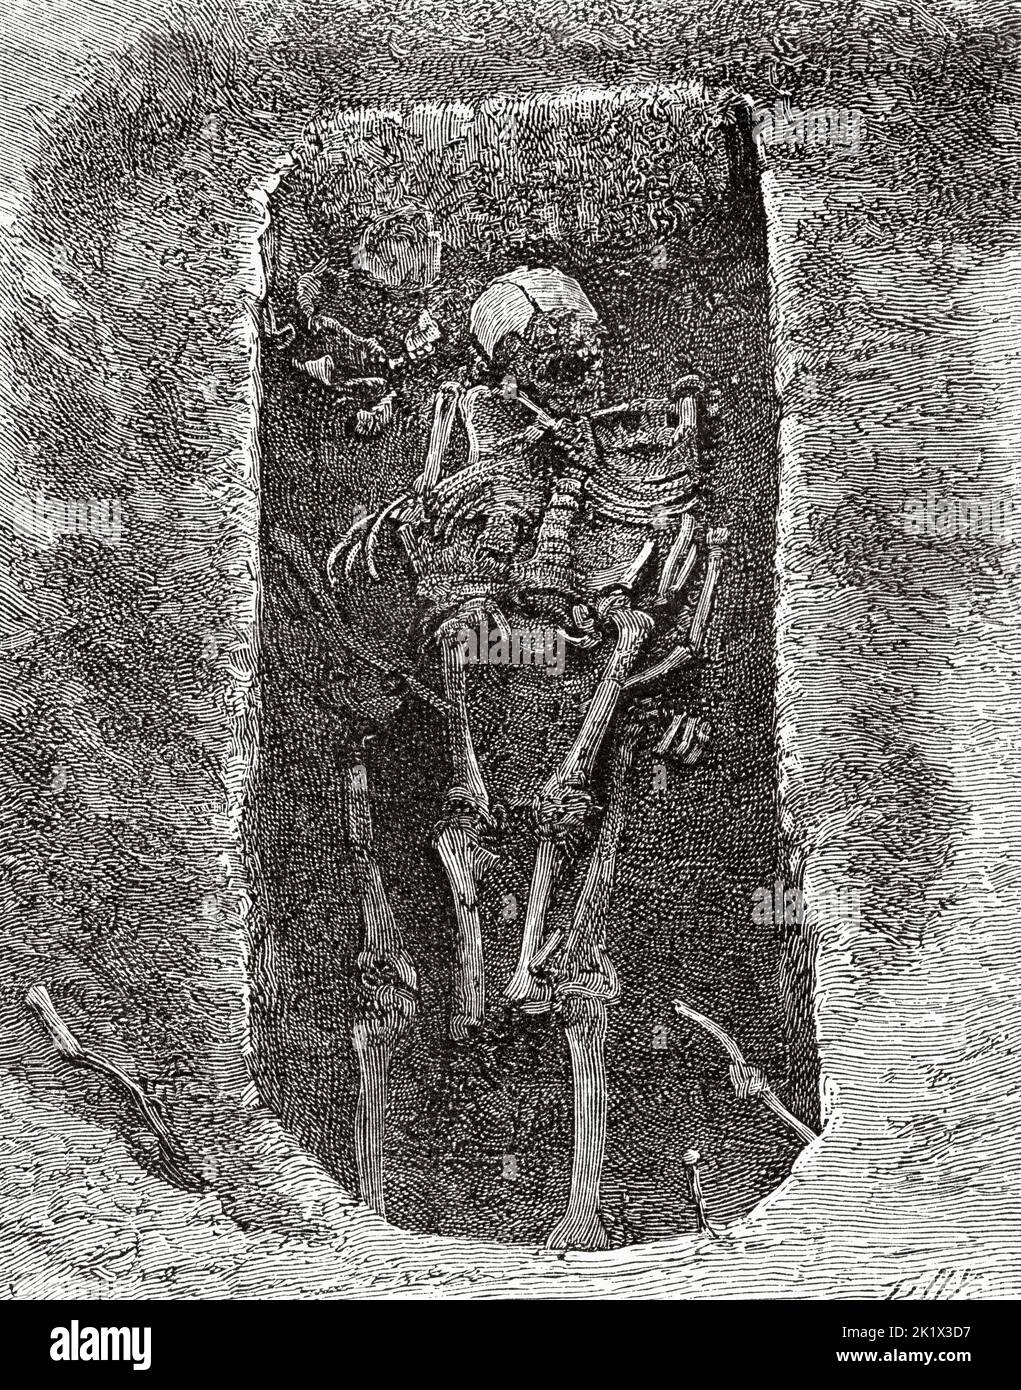 Merovingian graves discovered at Andresy, skeleton of a woman, France. Old 19th century engraved illustration from La Nature 1890 Stock Photo